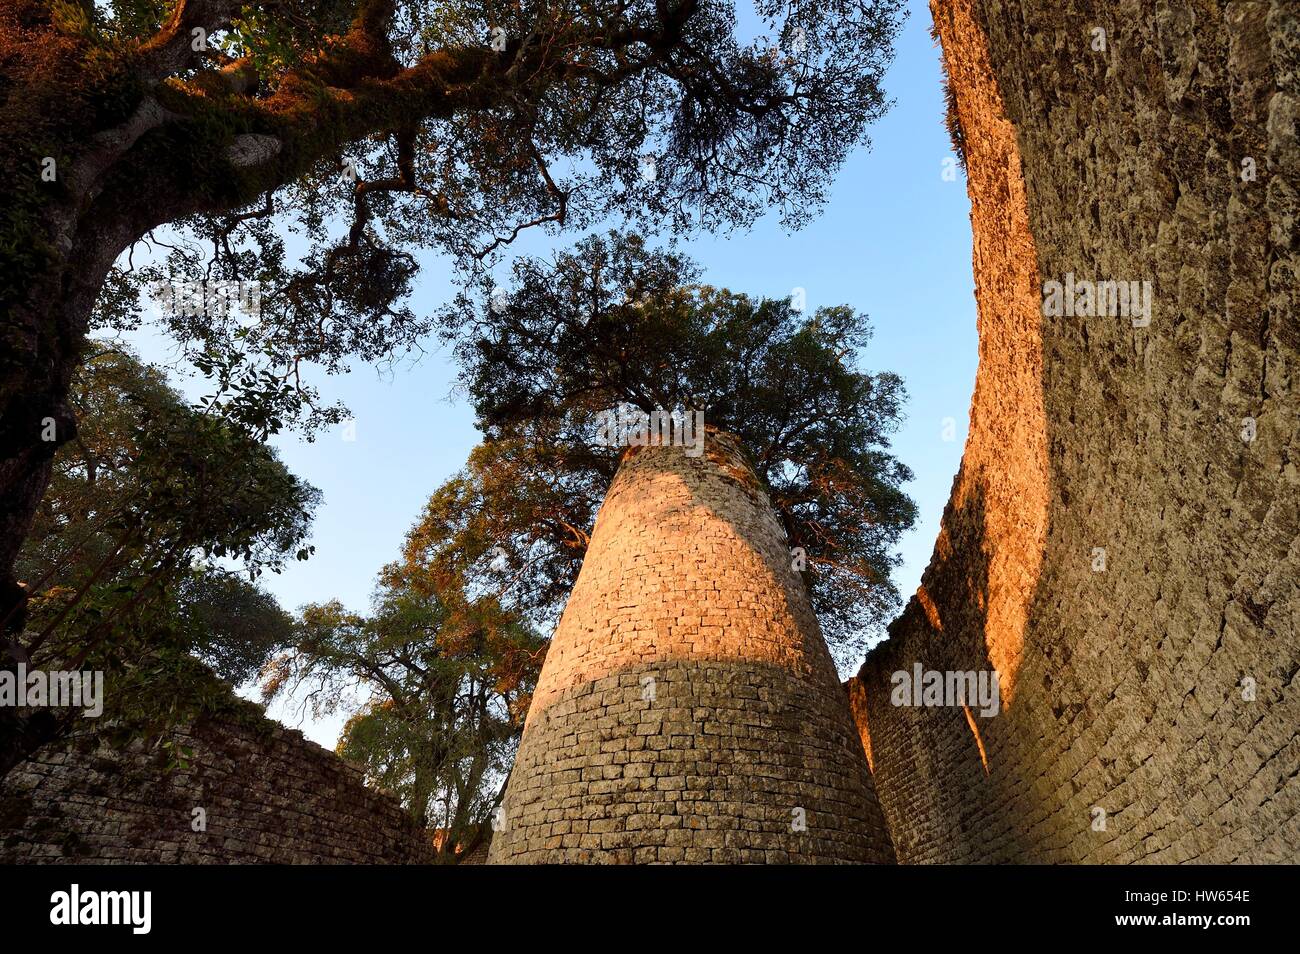 Zimbabwe, Masvingo province, the ruins of the archaeological site of Great Zimbabwe, UNESCO World Heritage List, 10th-15th century, the conical tower inside the Great Enclosure Stock Photo